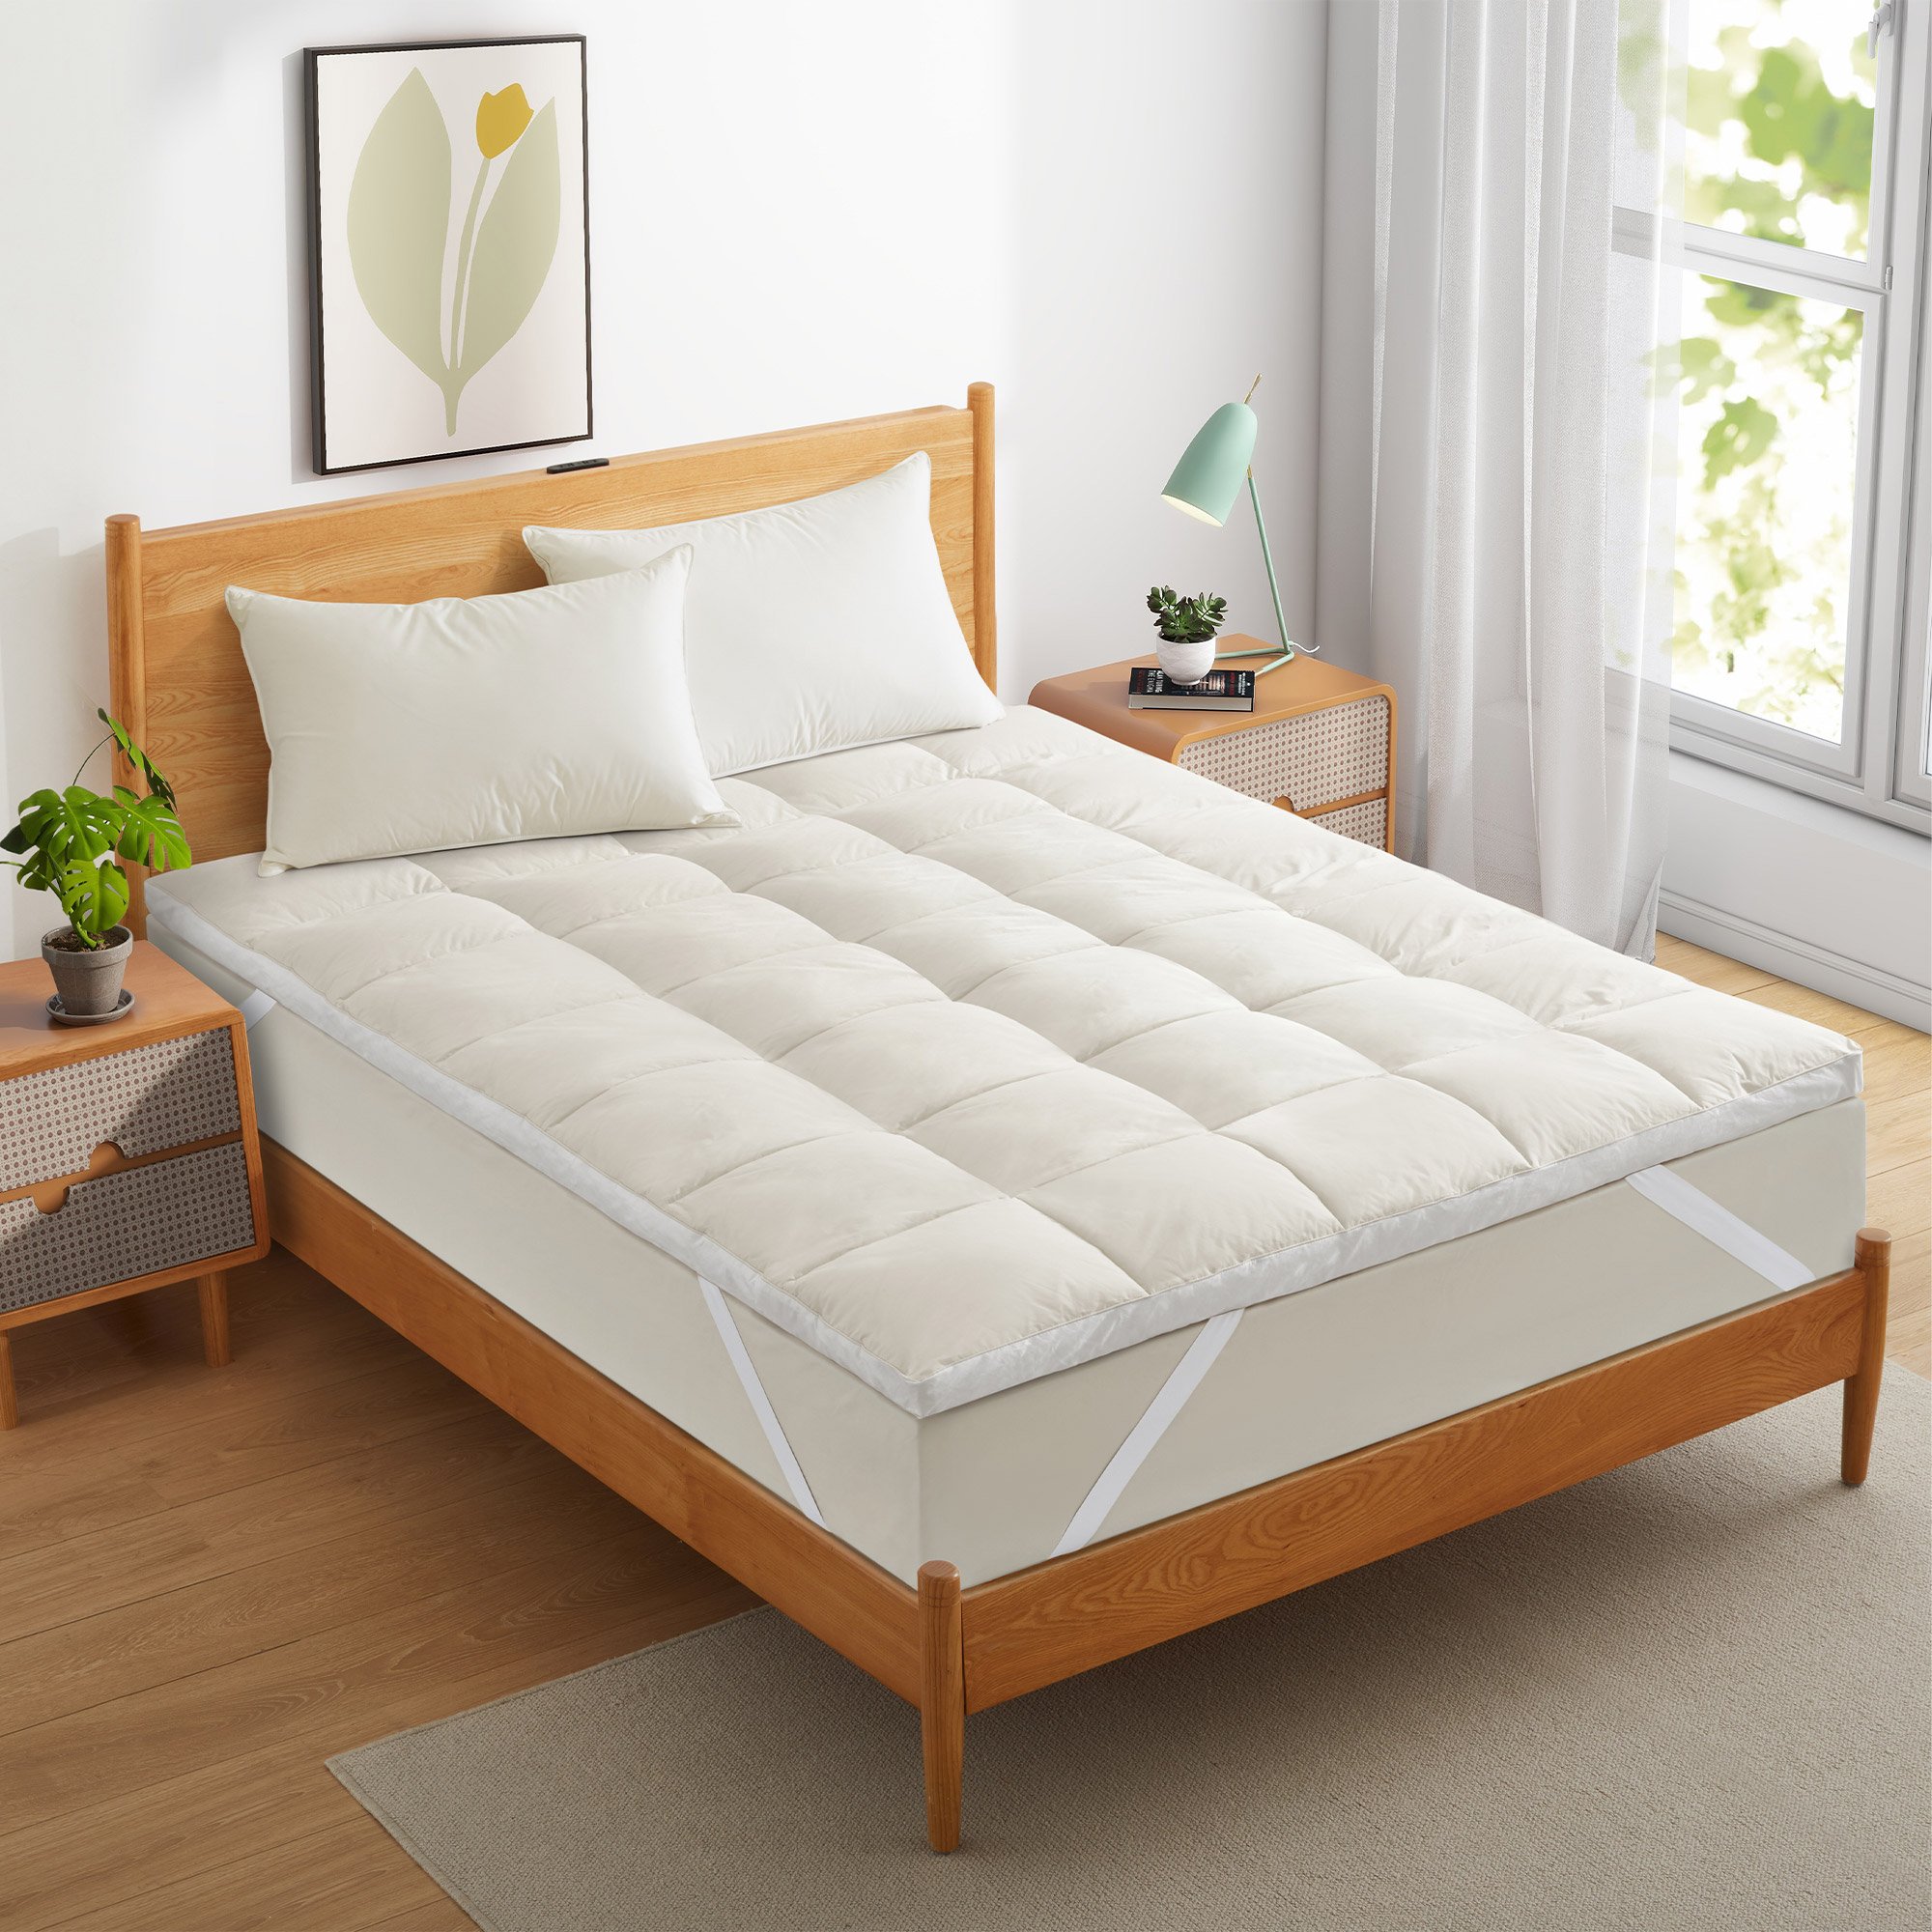 White Goose Feather Bed, Mattress Topper, Organic Cotton Cover Mattress Topper - Full, White